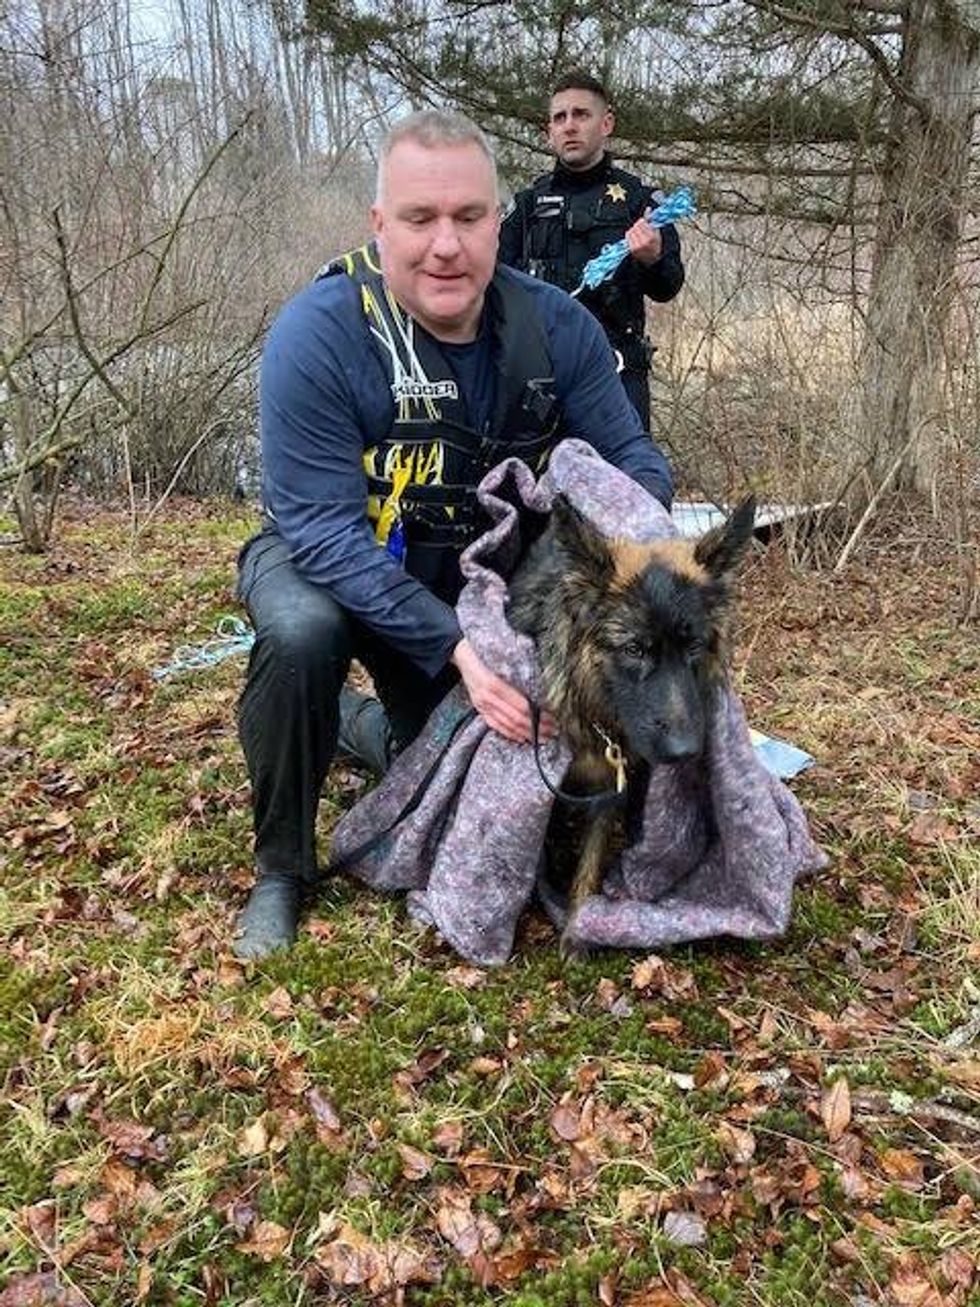 Sheriff’s sergeant rescues dog from icy pond